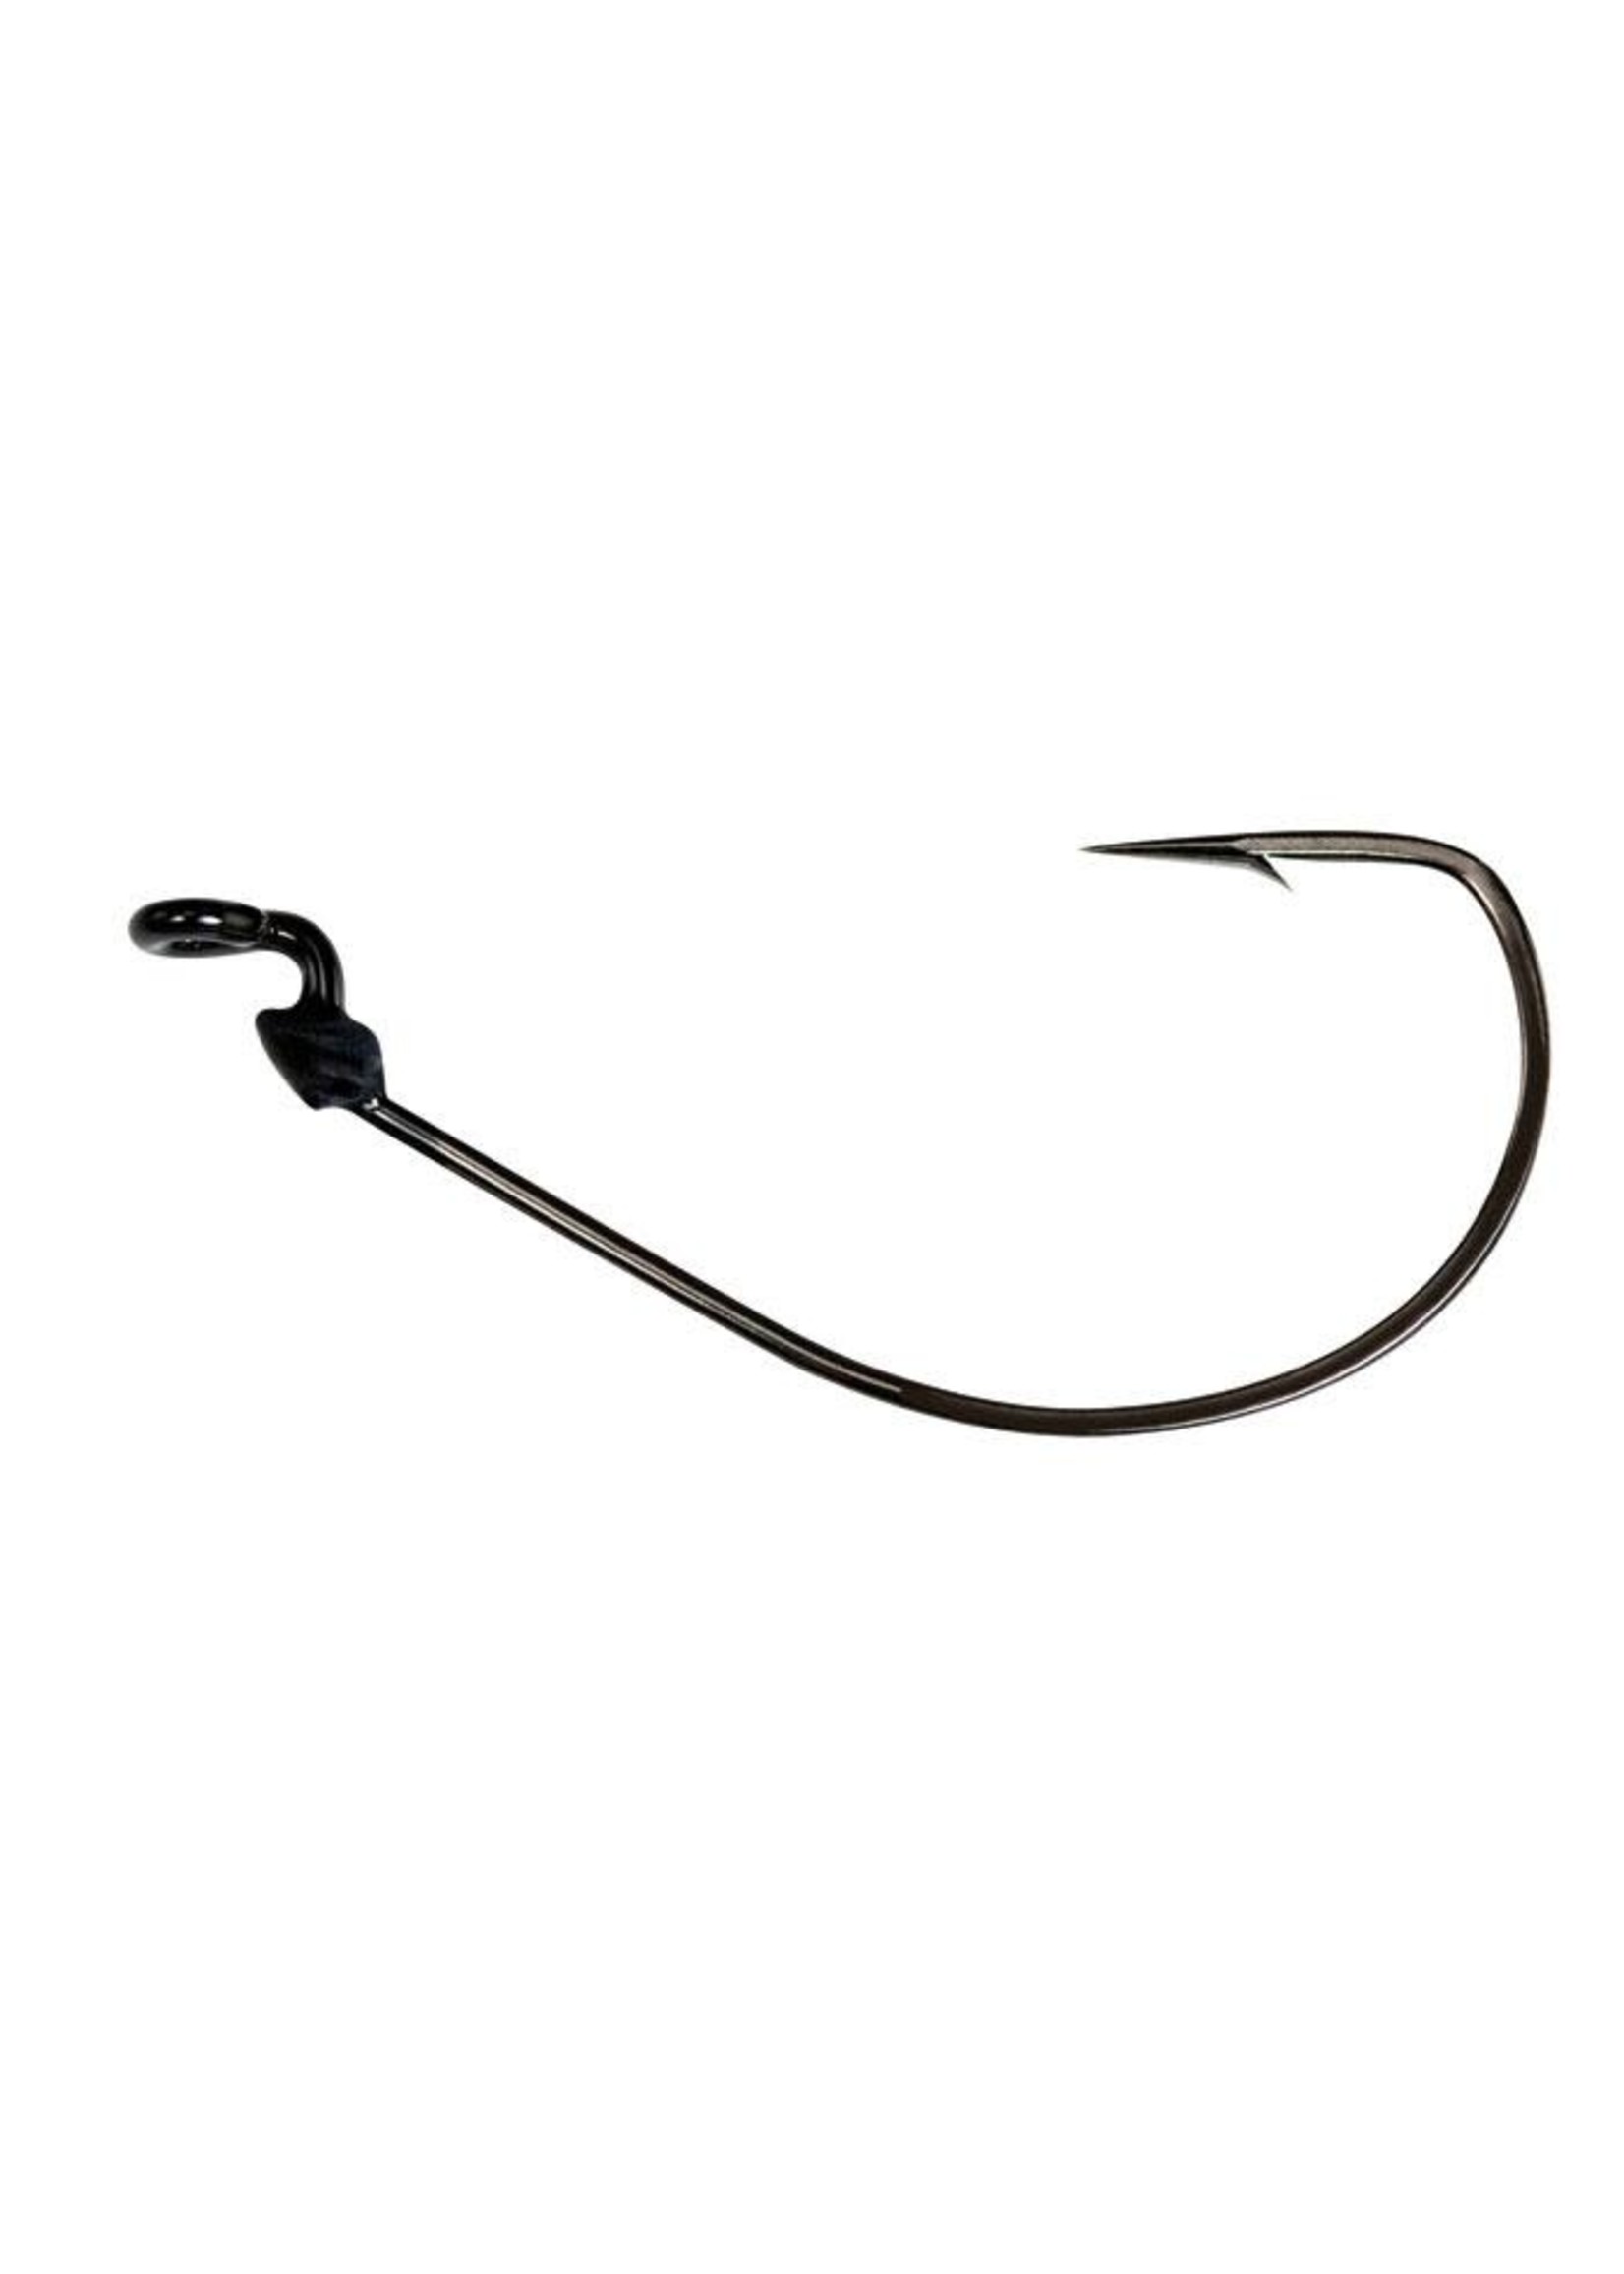 MUSTAD MUSTAD GRIP -PIN KVD SOFT PLASTIC HOOKS 3/0 - Rugged Shoal Outfitters